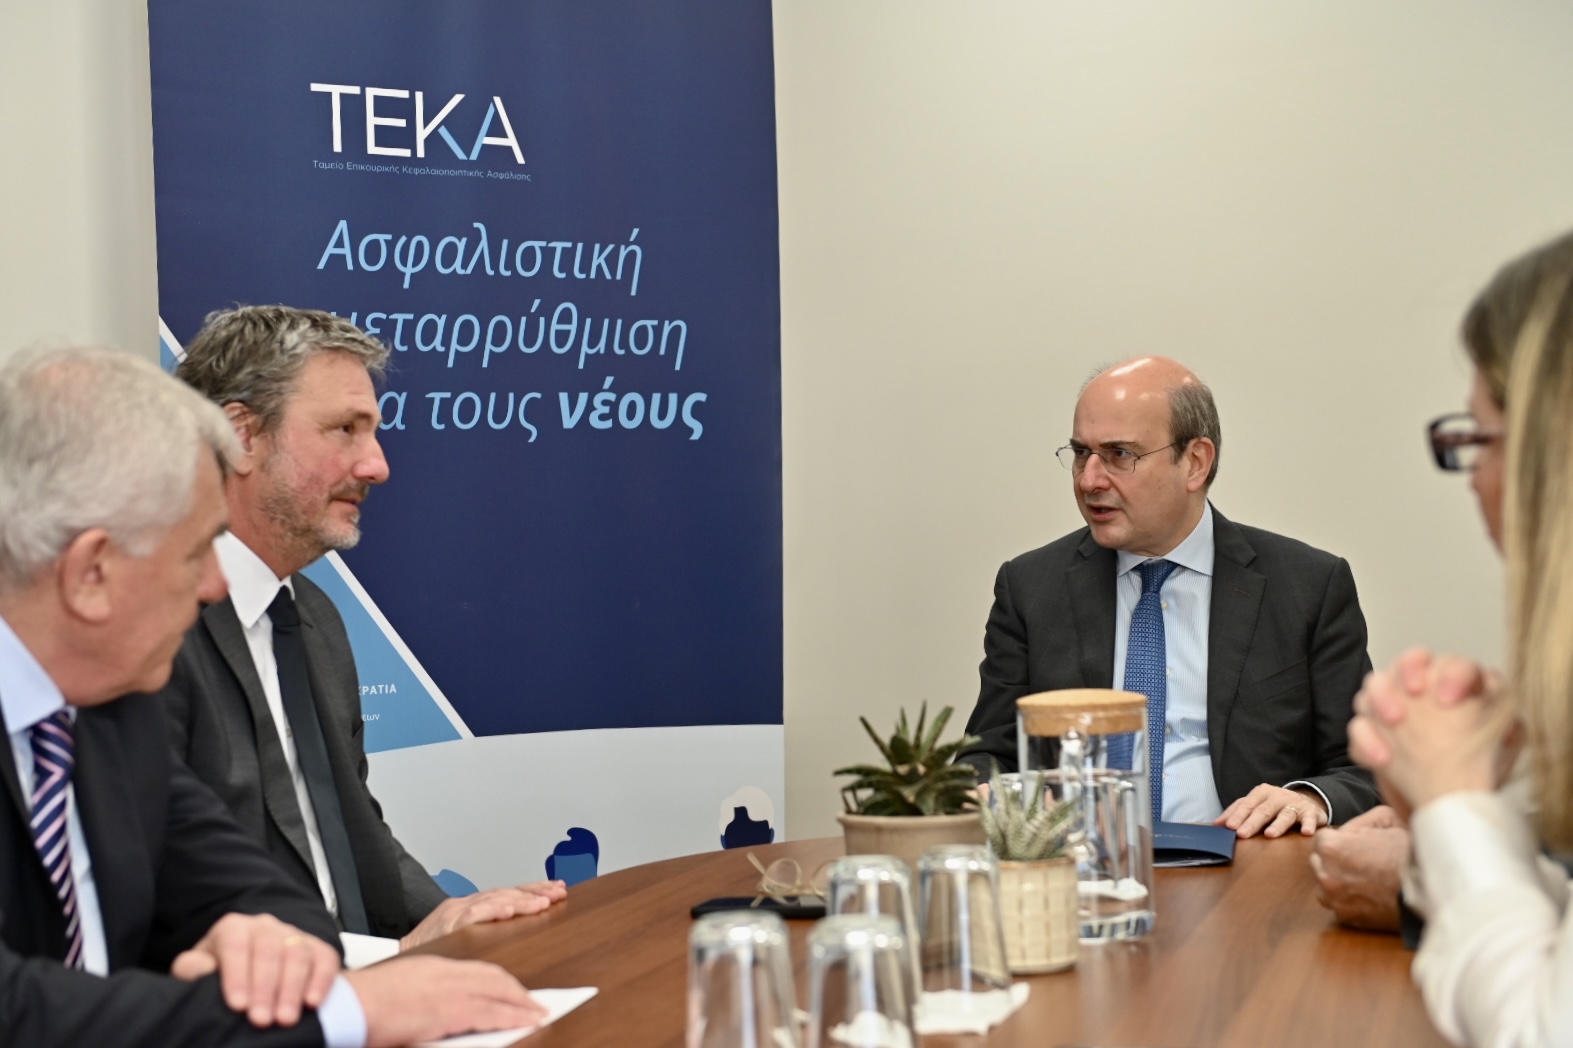 TEKA ceo and Minister of Labor